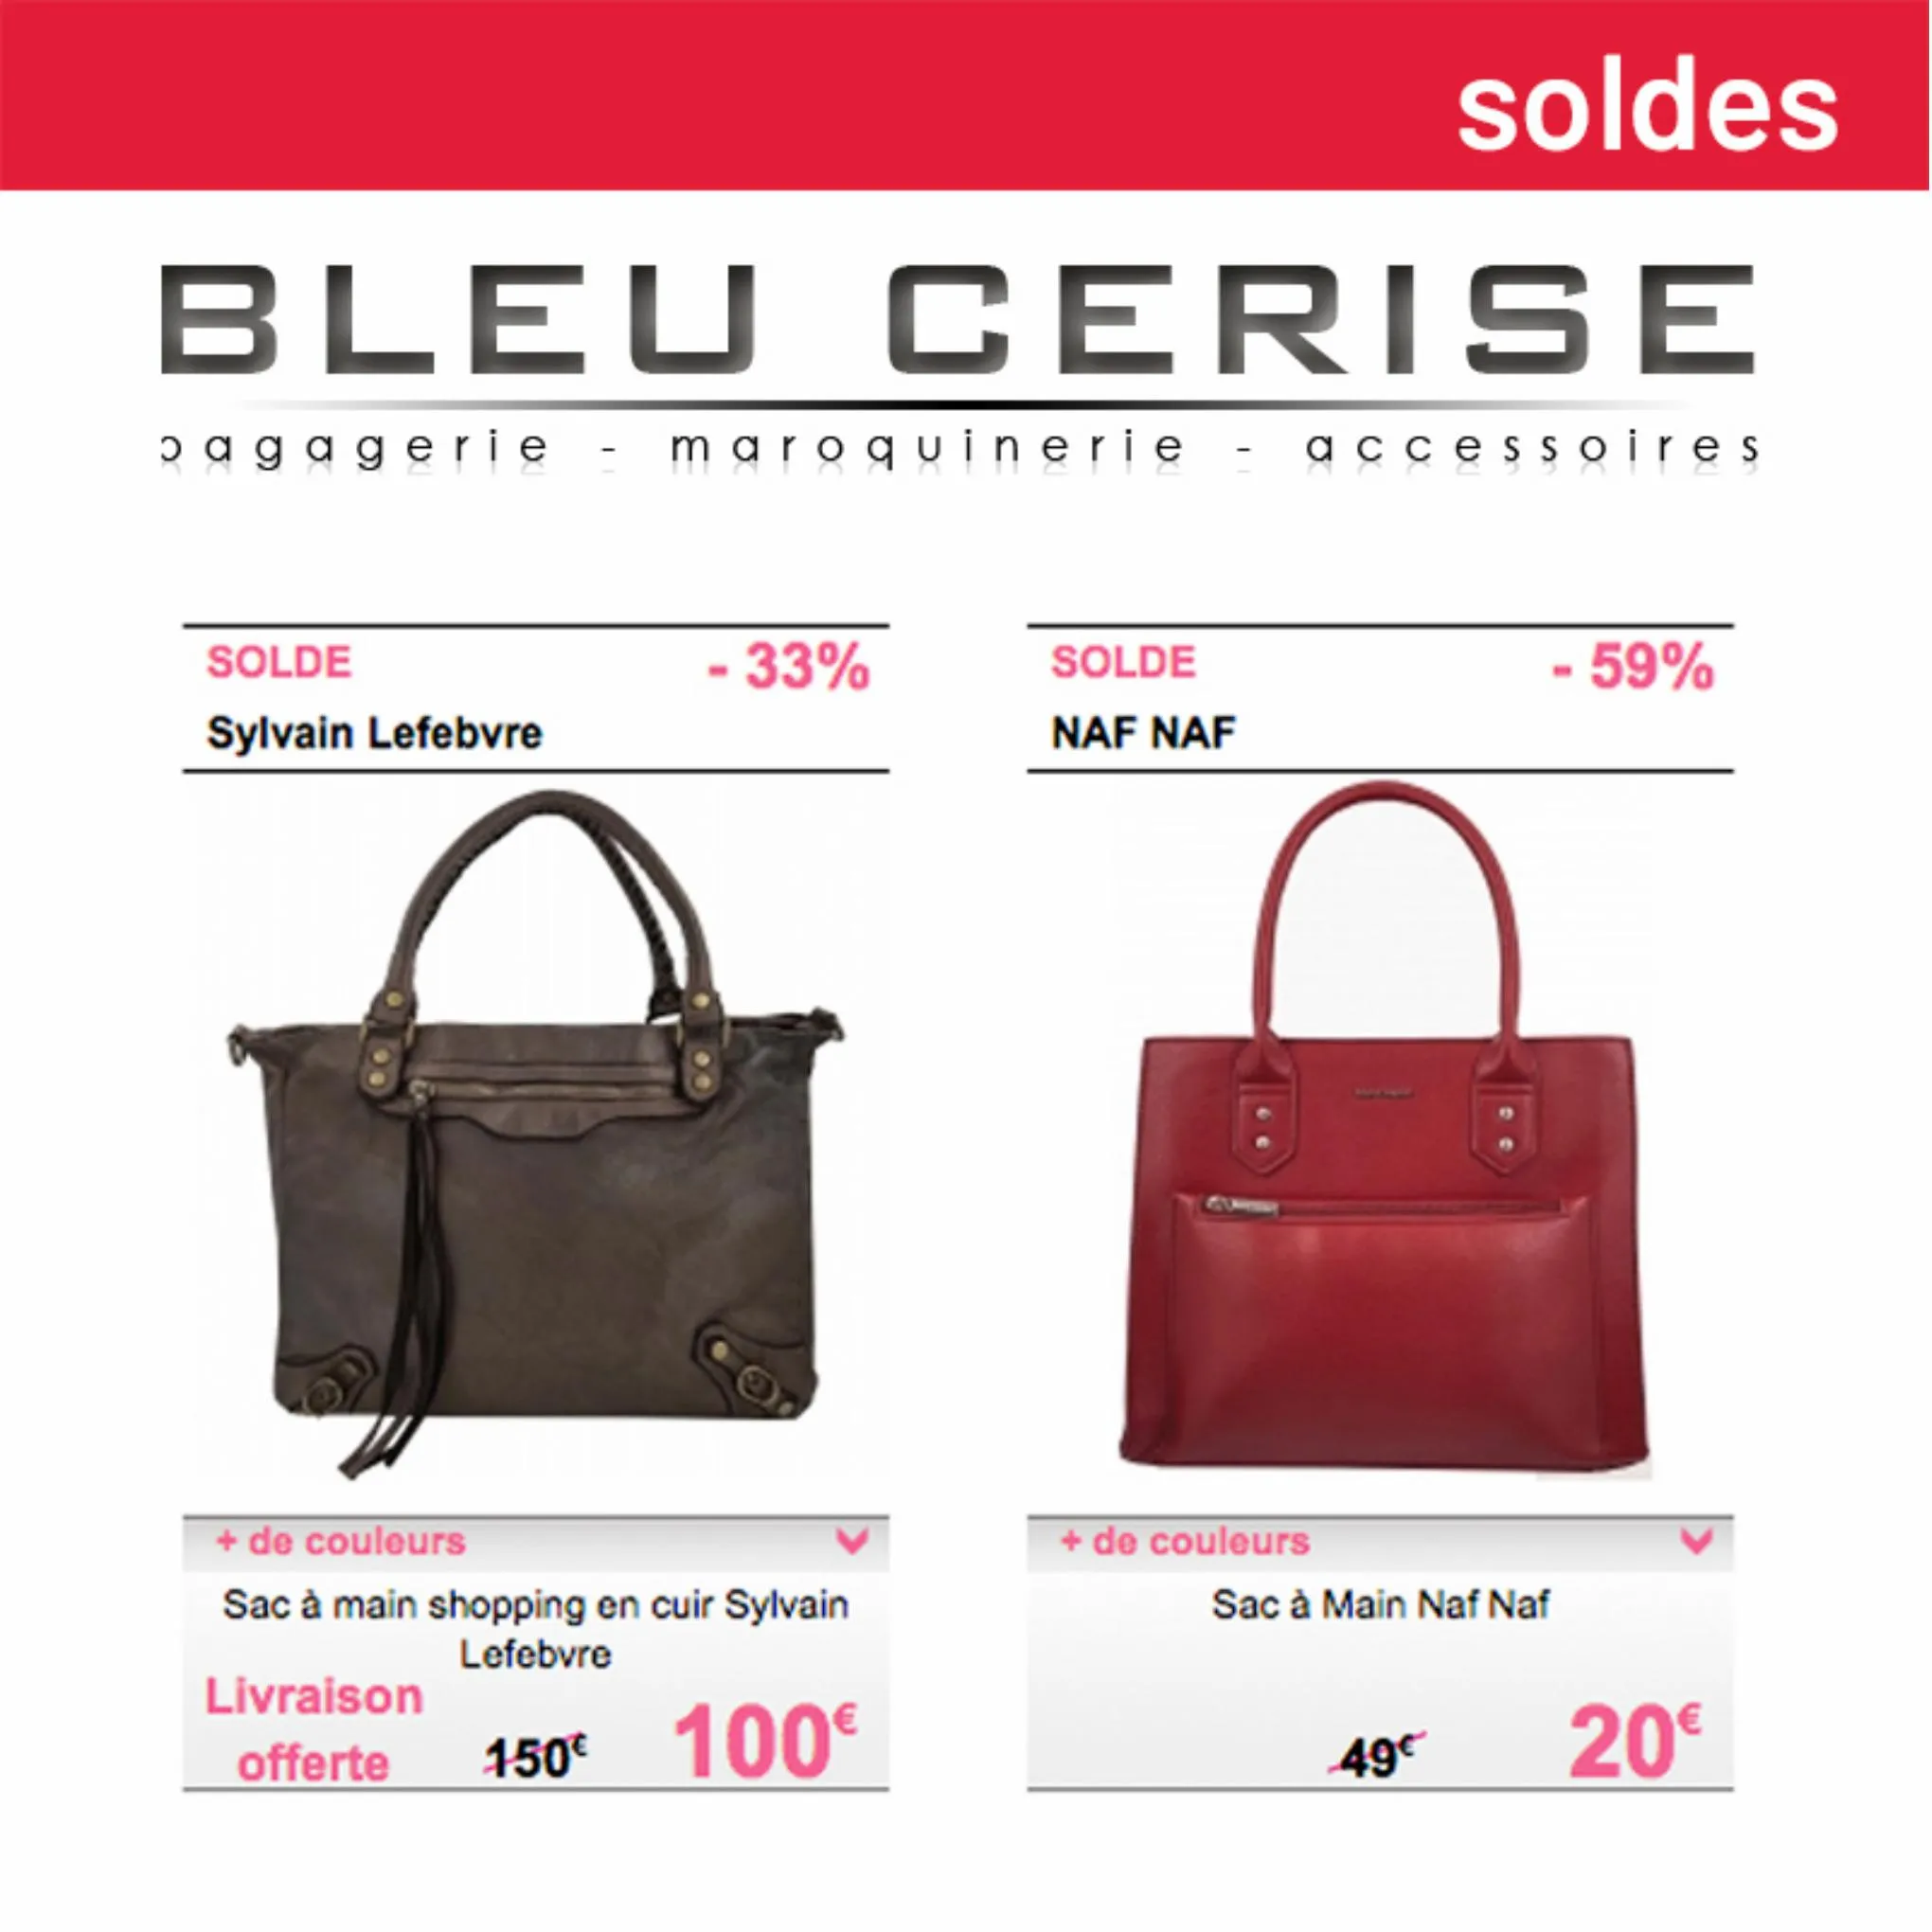 Catalogue Soldes, page 00002